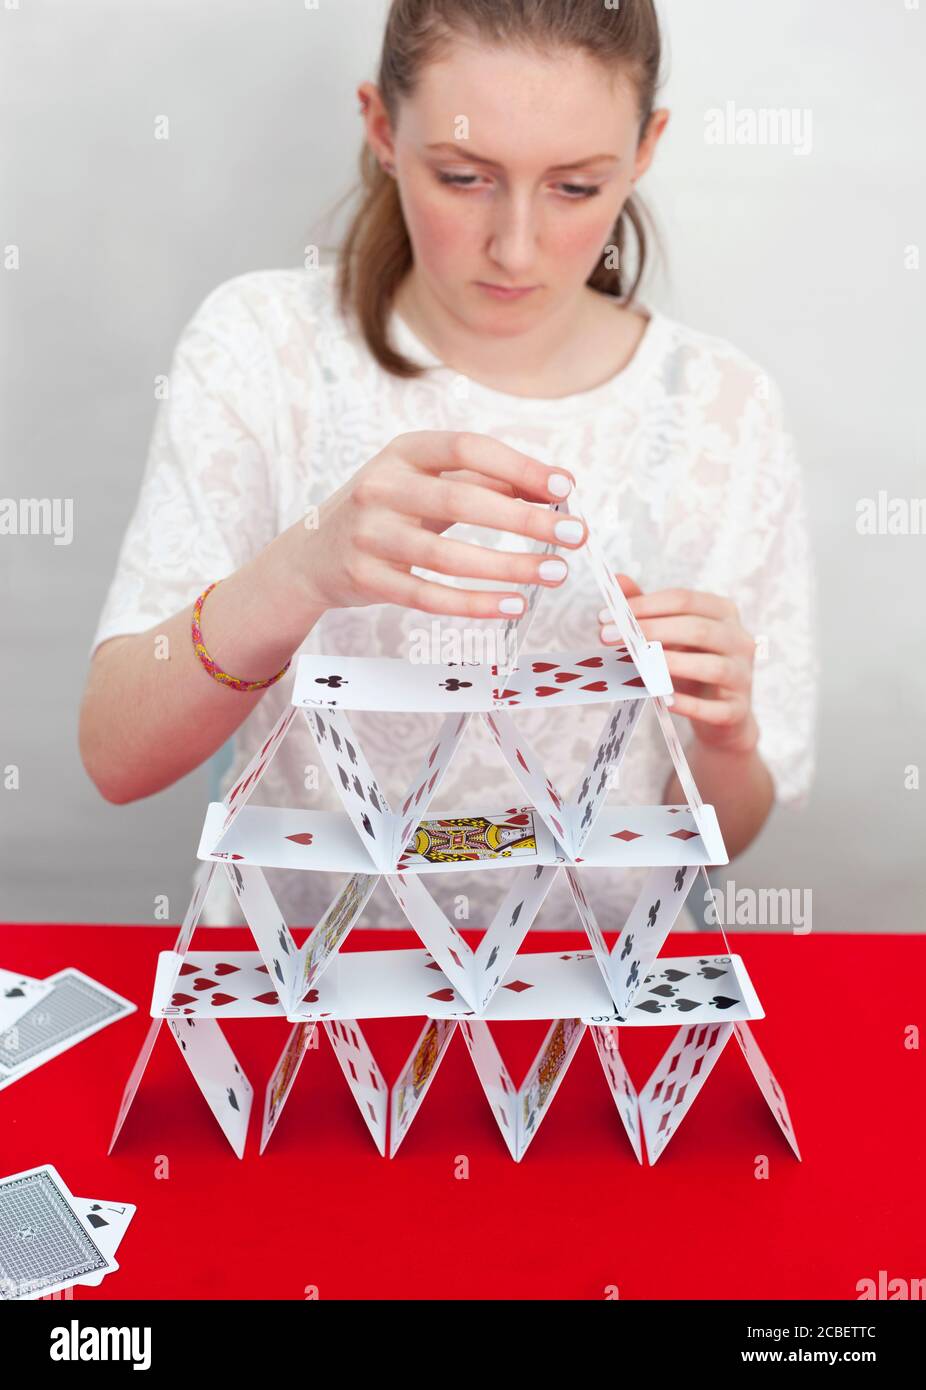 A teenage girl builds a house of playing cards Stock Photo